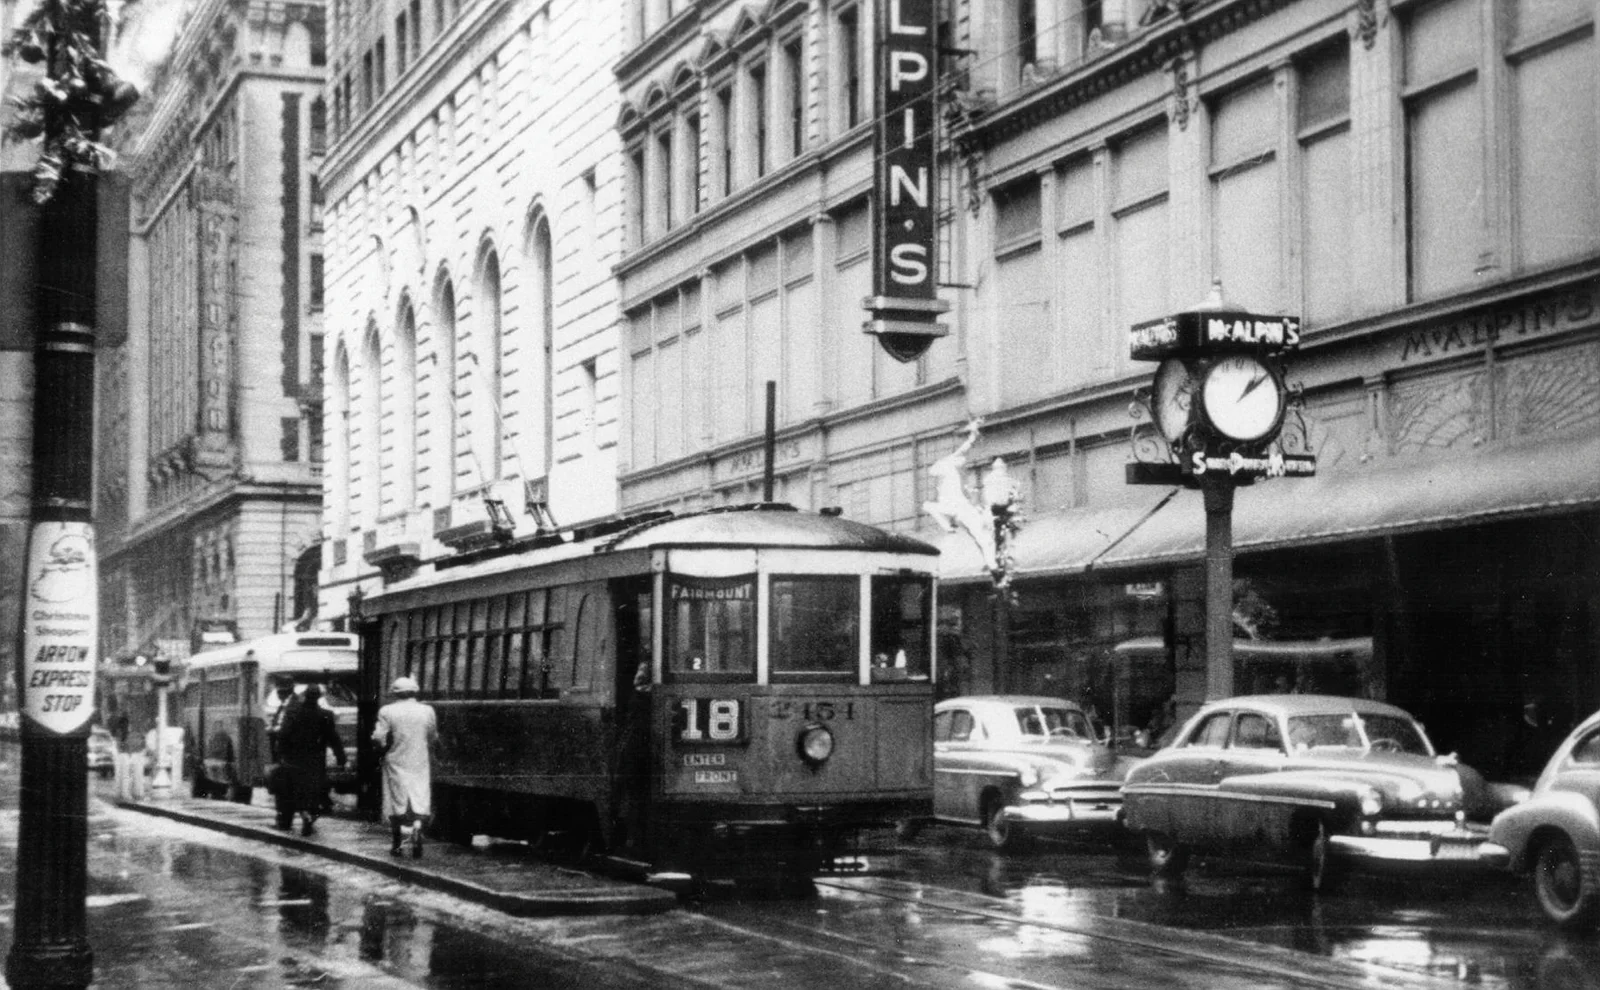 A black and white, atmospheric shot of Cincinnati streets, perhaps an old tram line or a notable building in the background